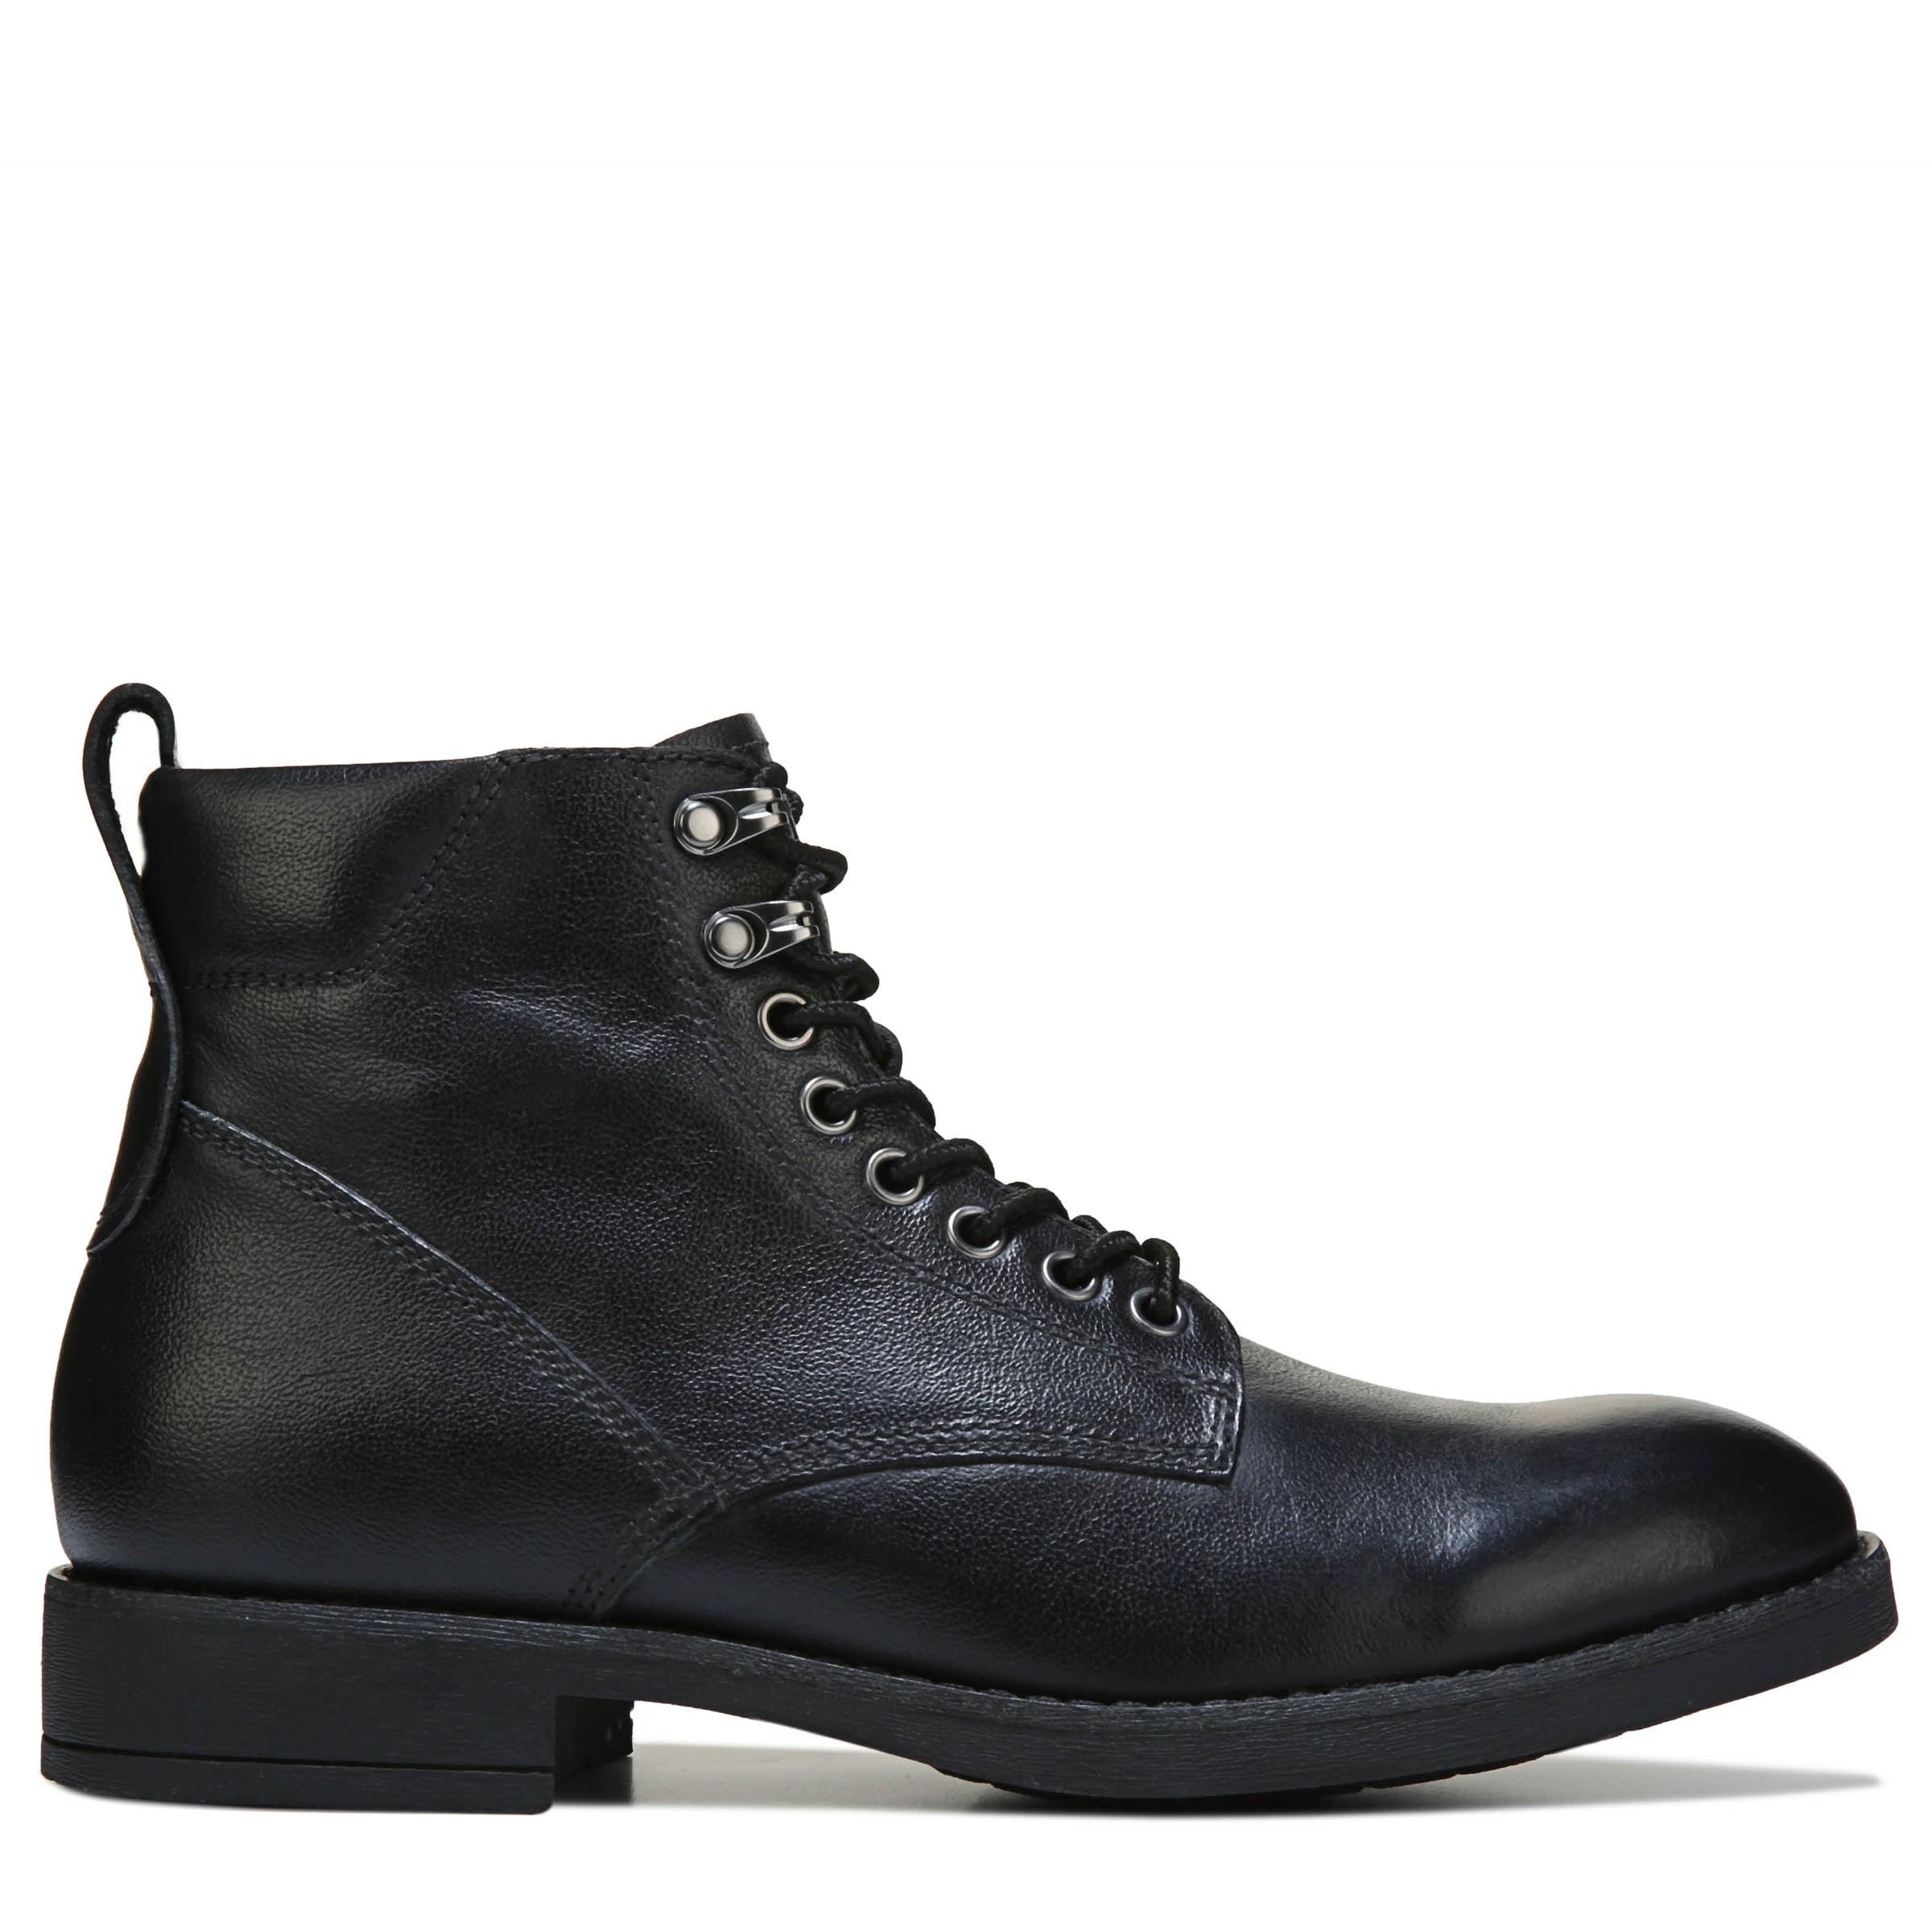 Eastland Leather Denali Lace Up Boots in Black for Men - Lyst